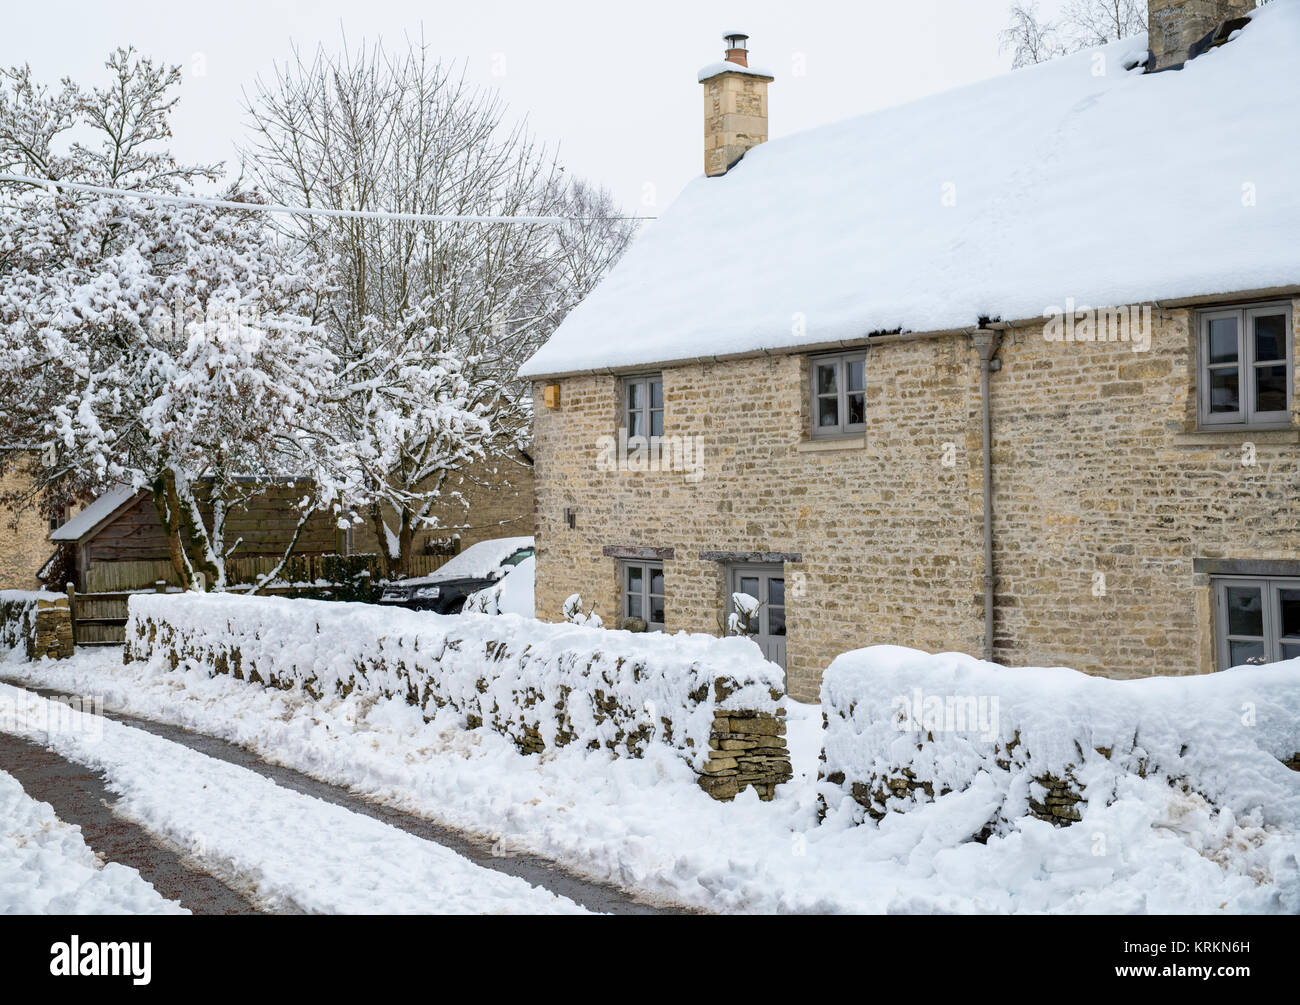 Chedworth Village Cottages im Dezember Schnee. Chedworth, Cotswolds, Gloucestershire, England Stockfoto